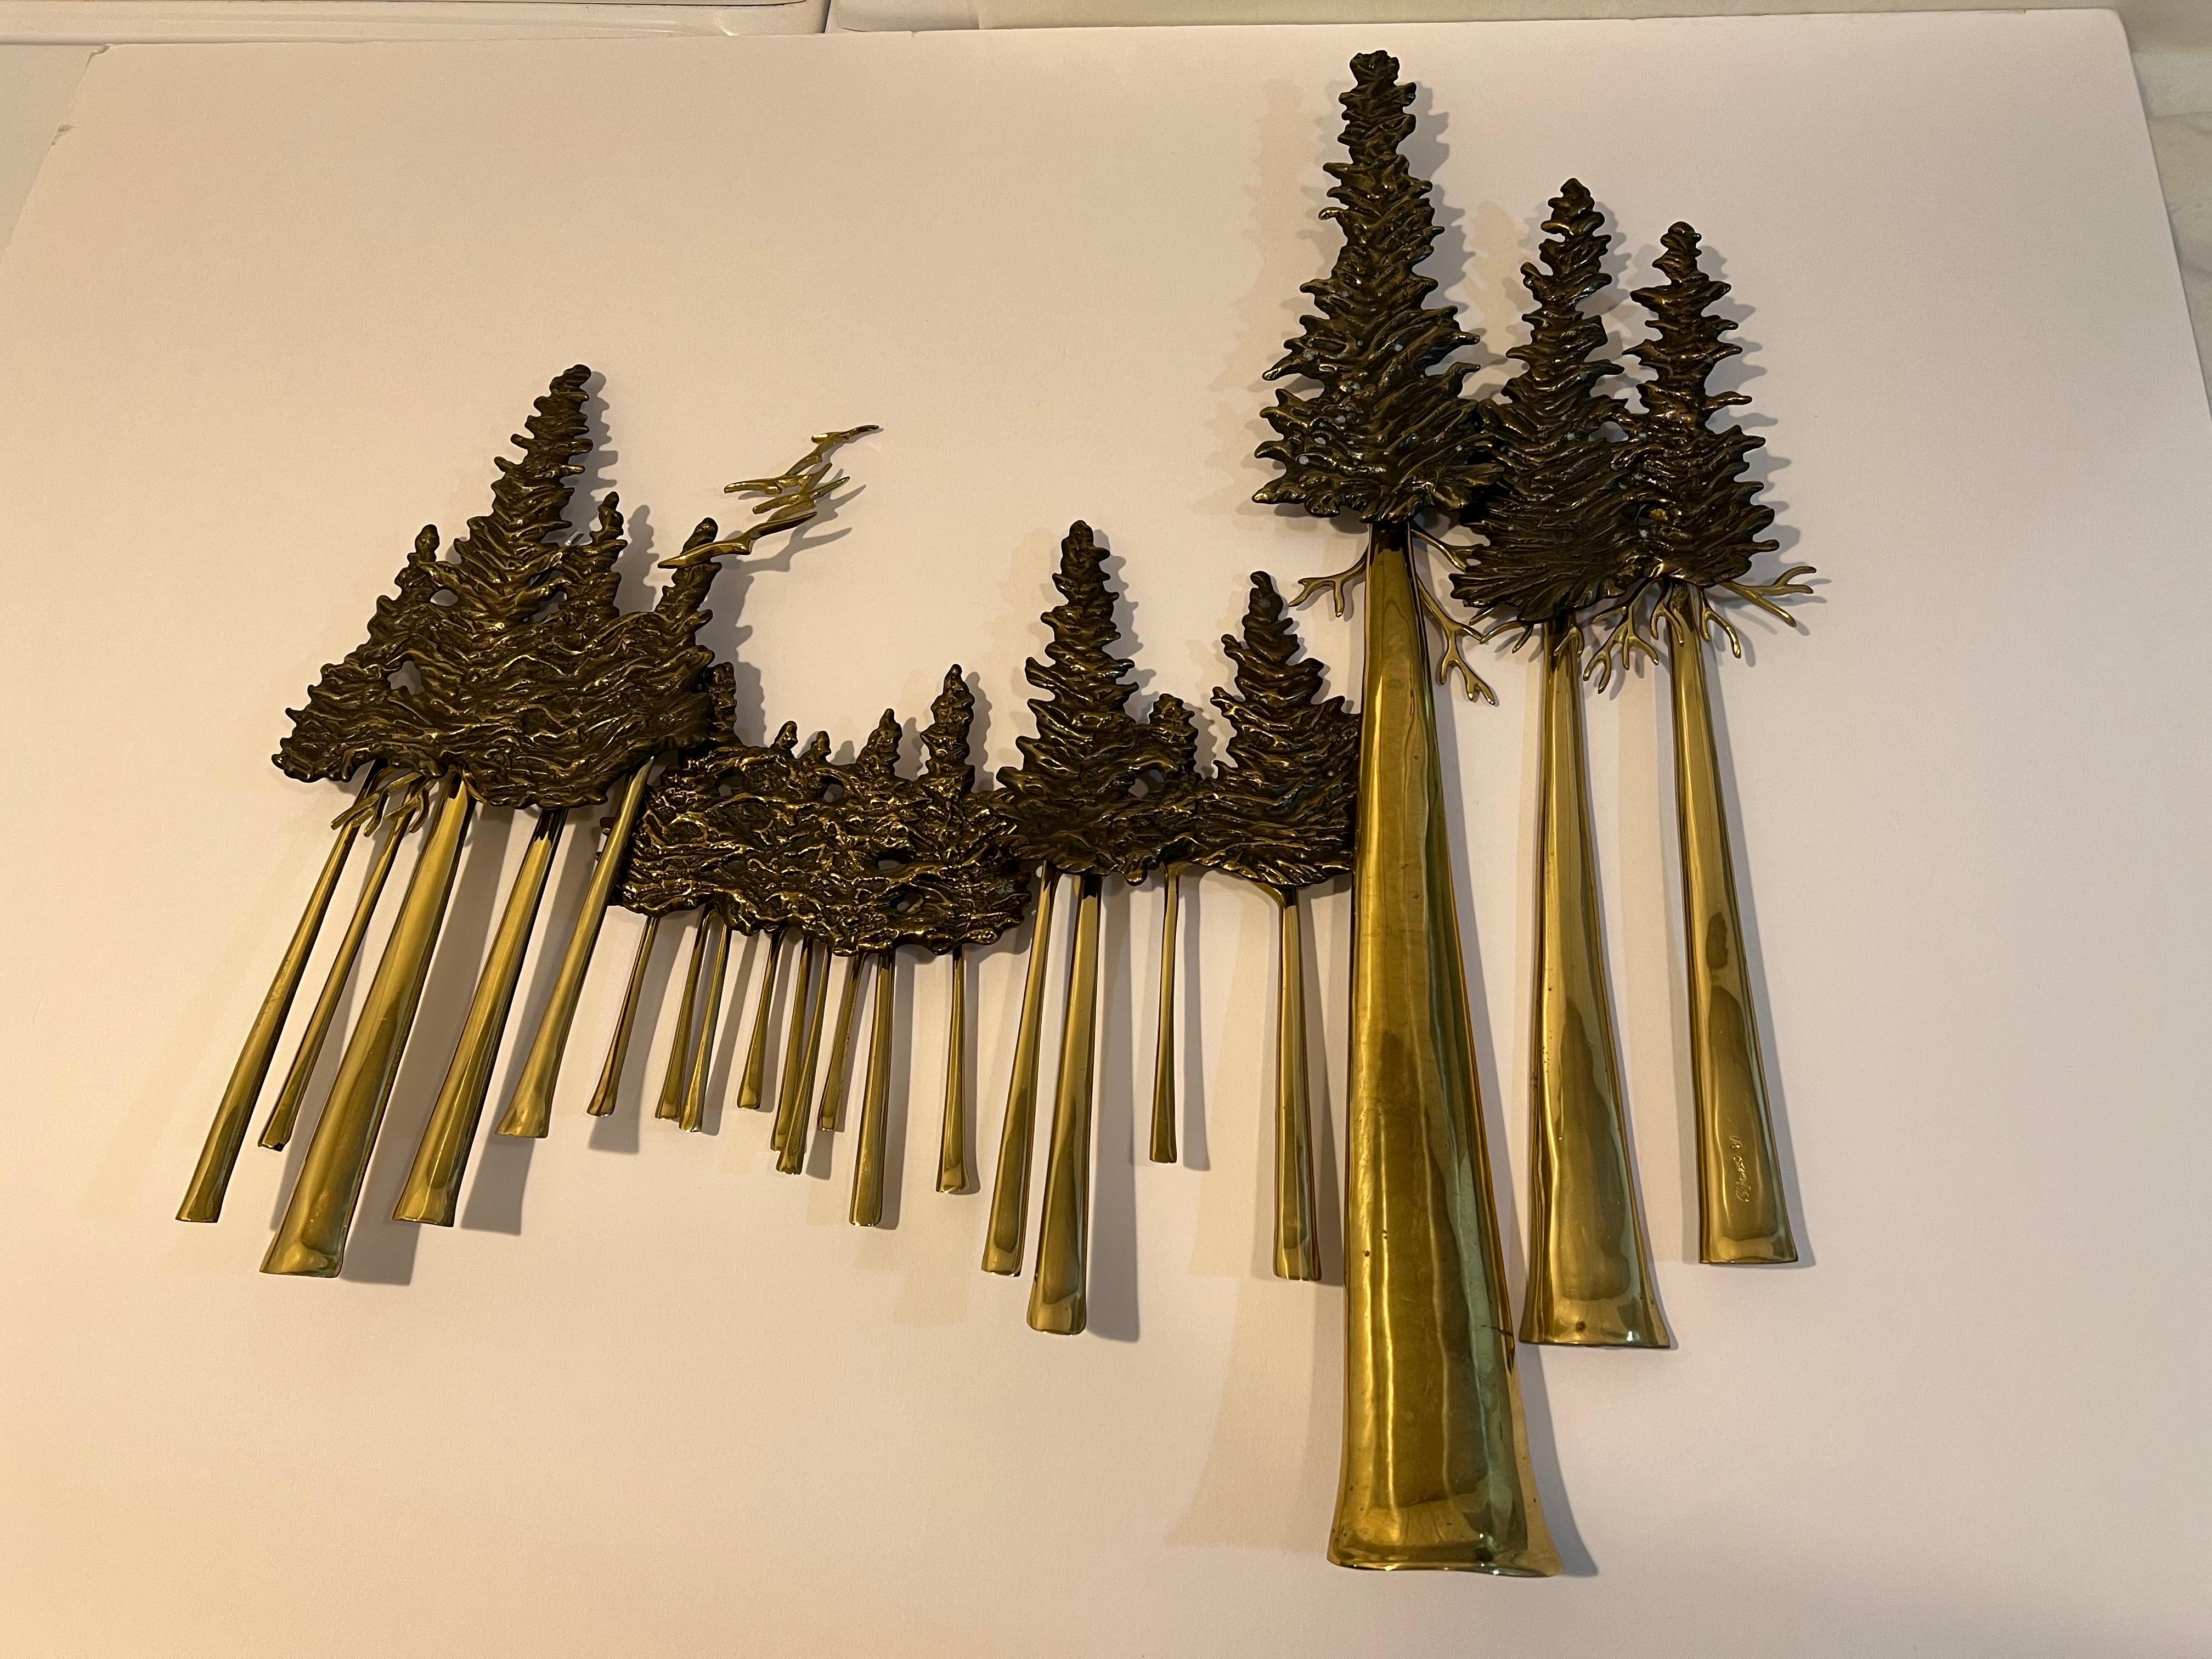 Rare Signed brass tree wall sculpture by Bijan. Solid brass sculpture of Pine Trees and birds at the top. Signed on the front and the back. This hard to find piece would be a great sculpture for that collector who has everything.